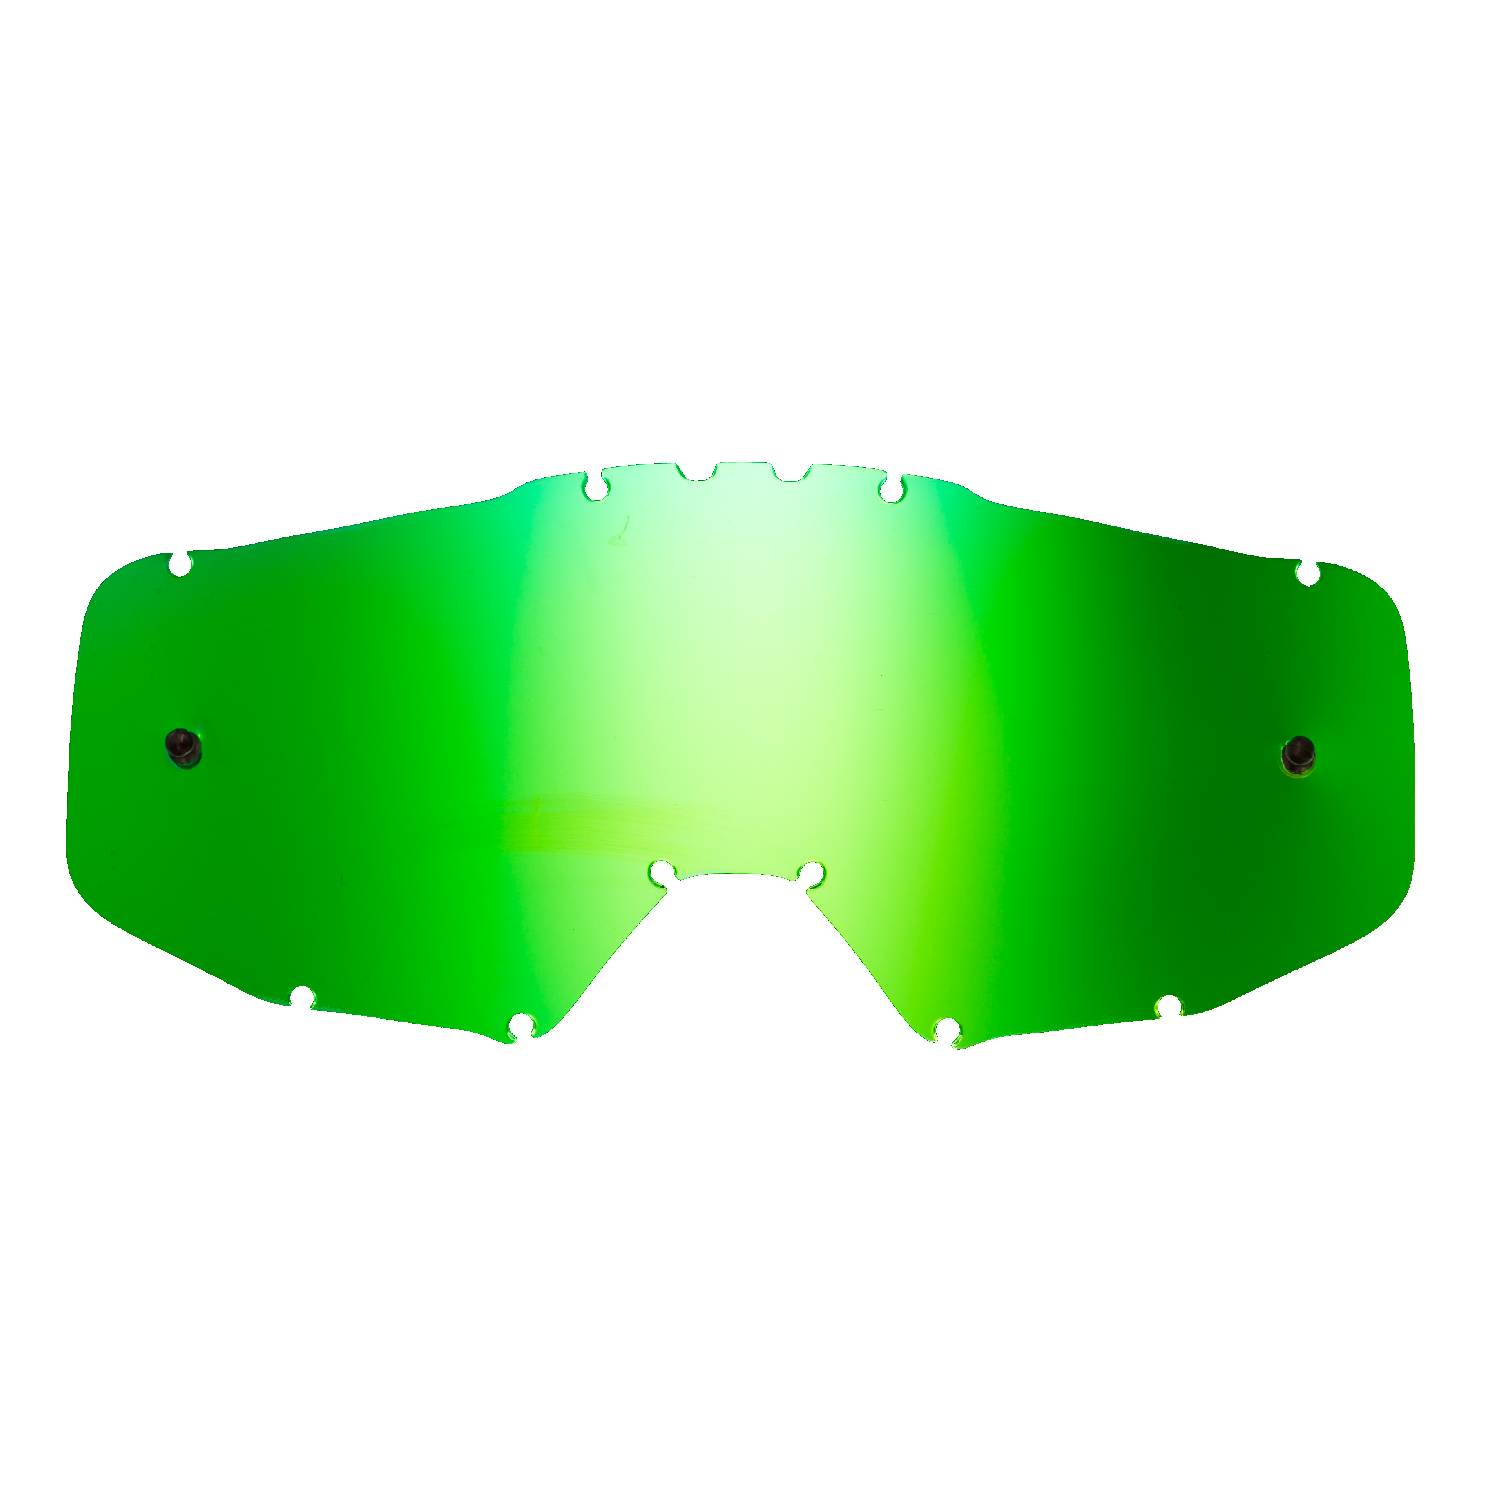 green-toned mirrored replacement lenses for goggles compatible for Just1 Iris / Vitro goggle